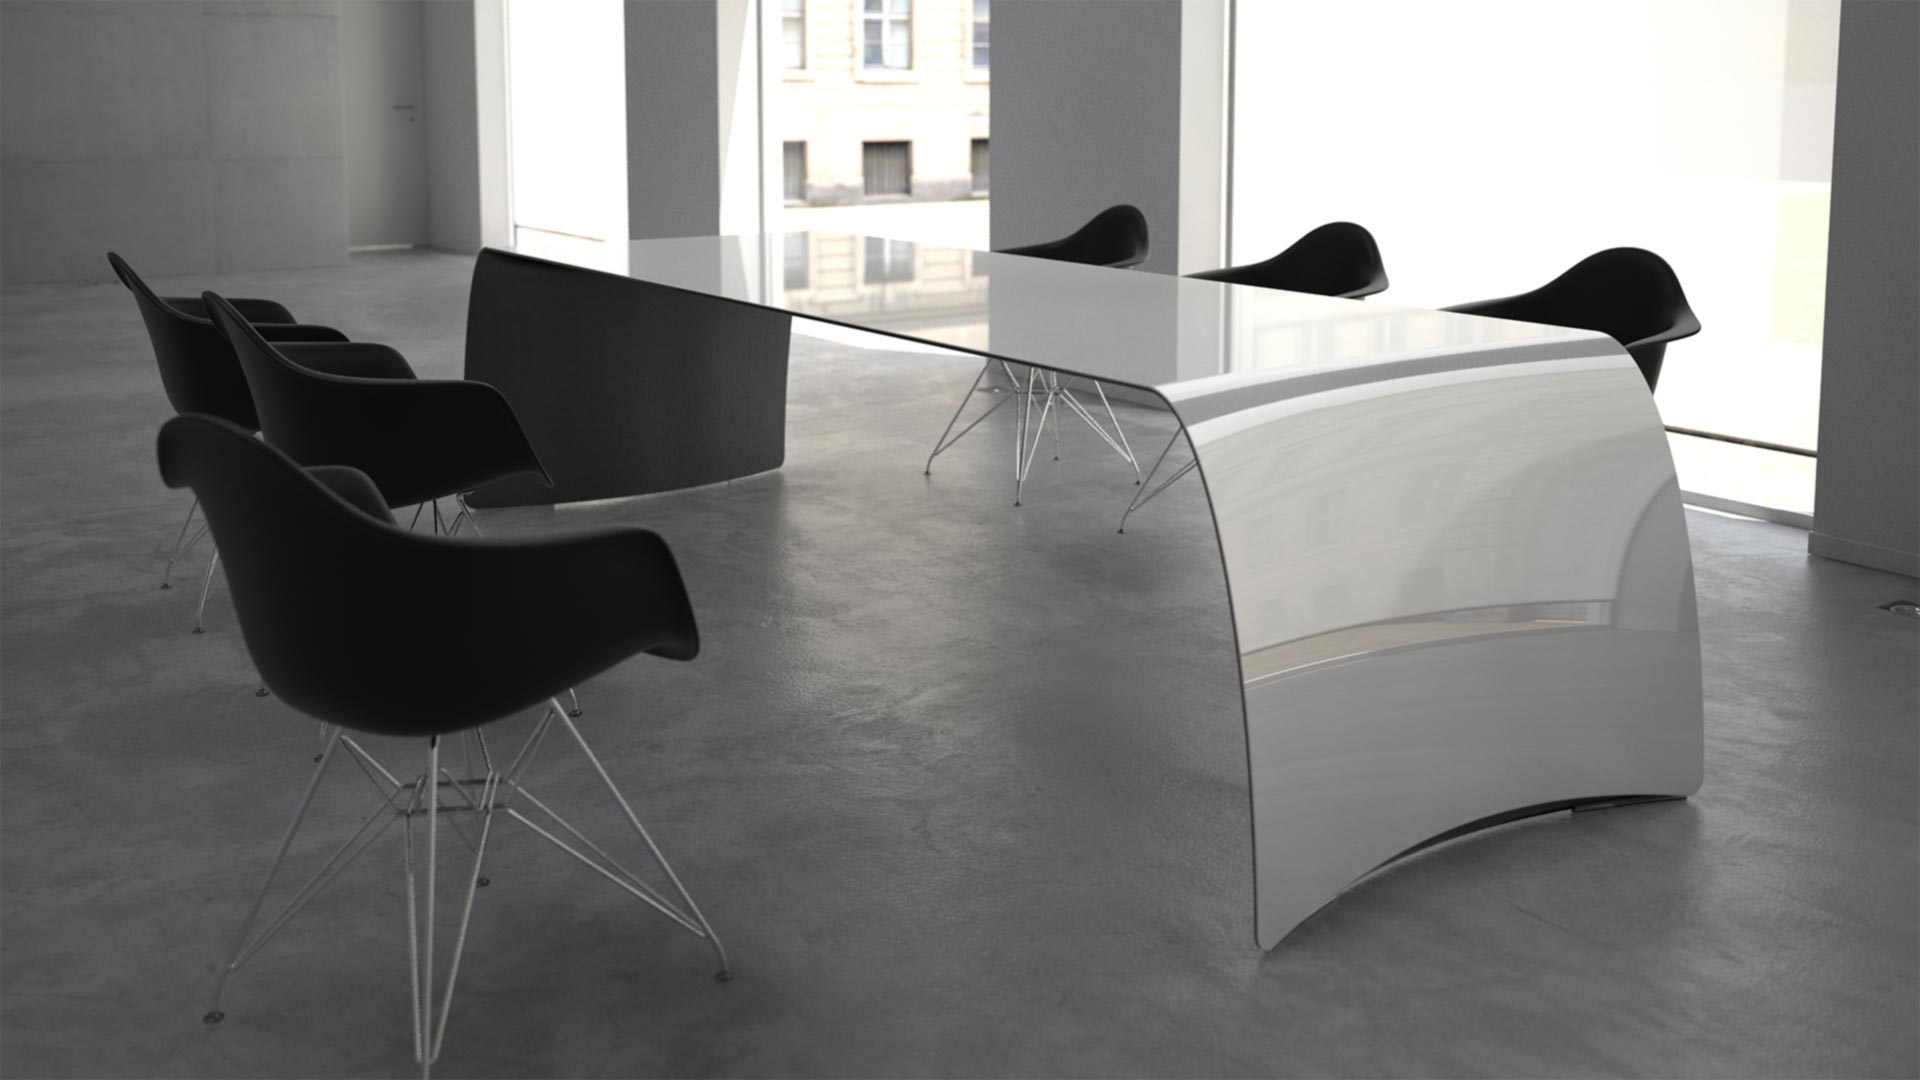 FLOYD /carbon. Dining table or desk. Made of carbon fiber, Kevlar and stainless steel. Painted matte white on top, black on the bottom side.